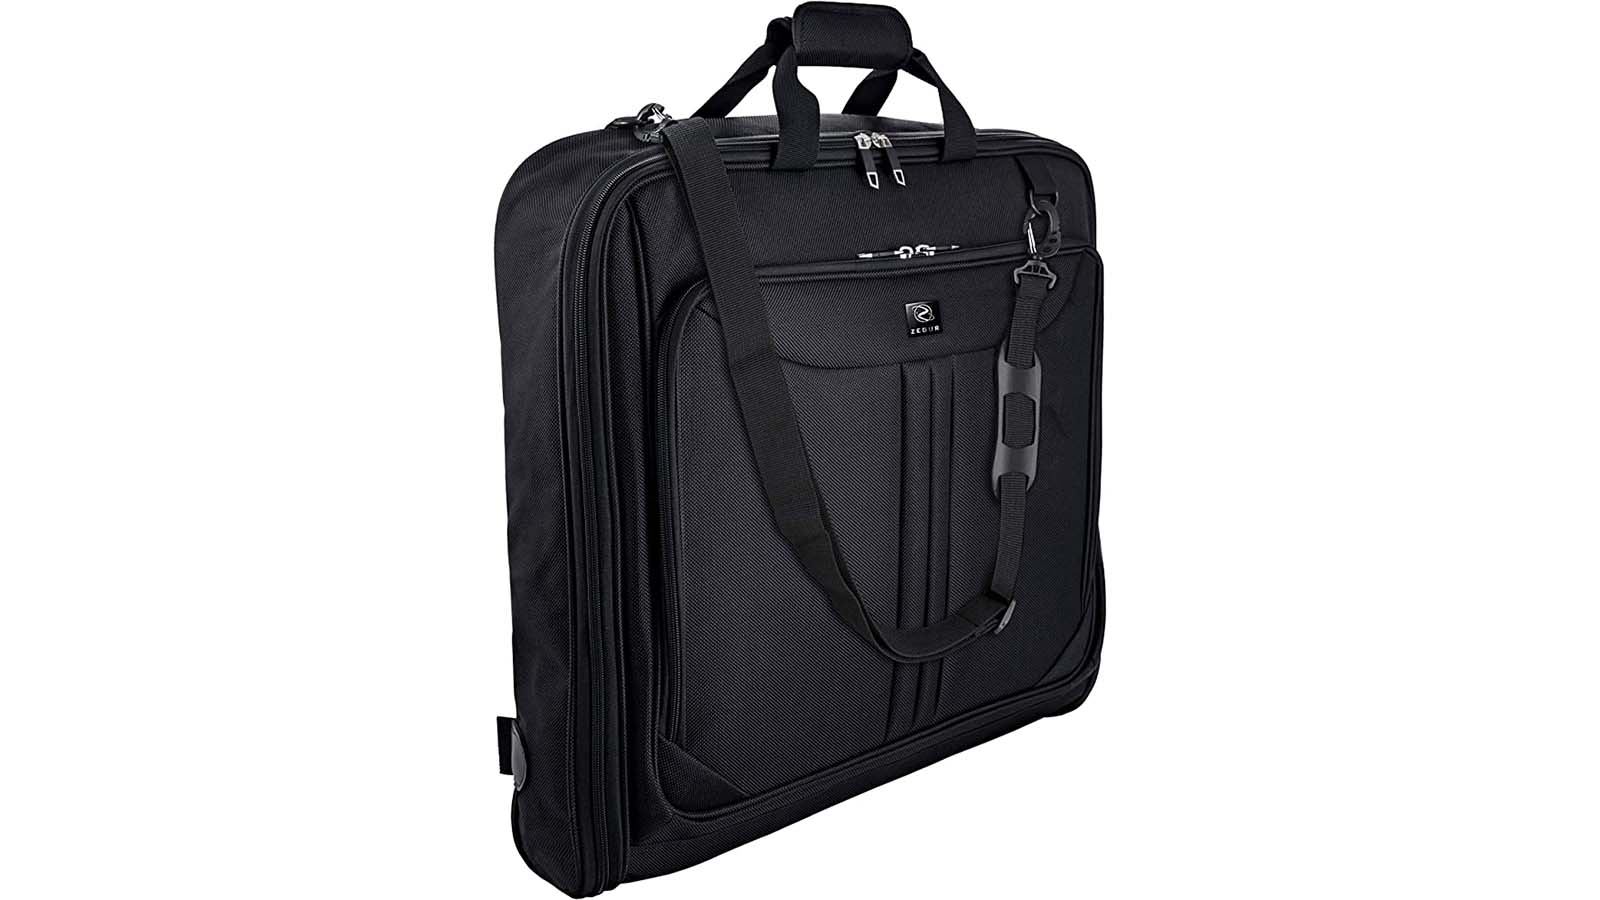 ZEGUR Suit Carry On Garment Bag for Travel & Business Trips With Shoulder  Strap and Rolling Luggage Attachment Point - Black